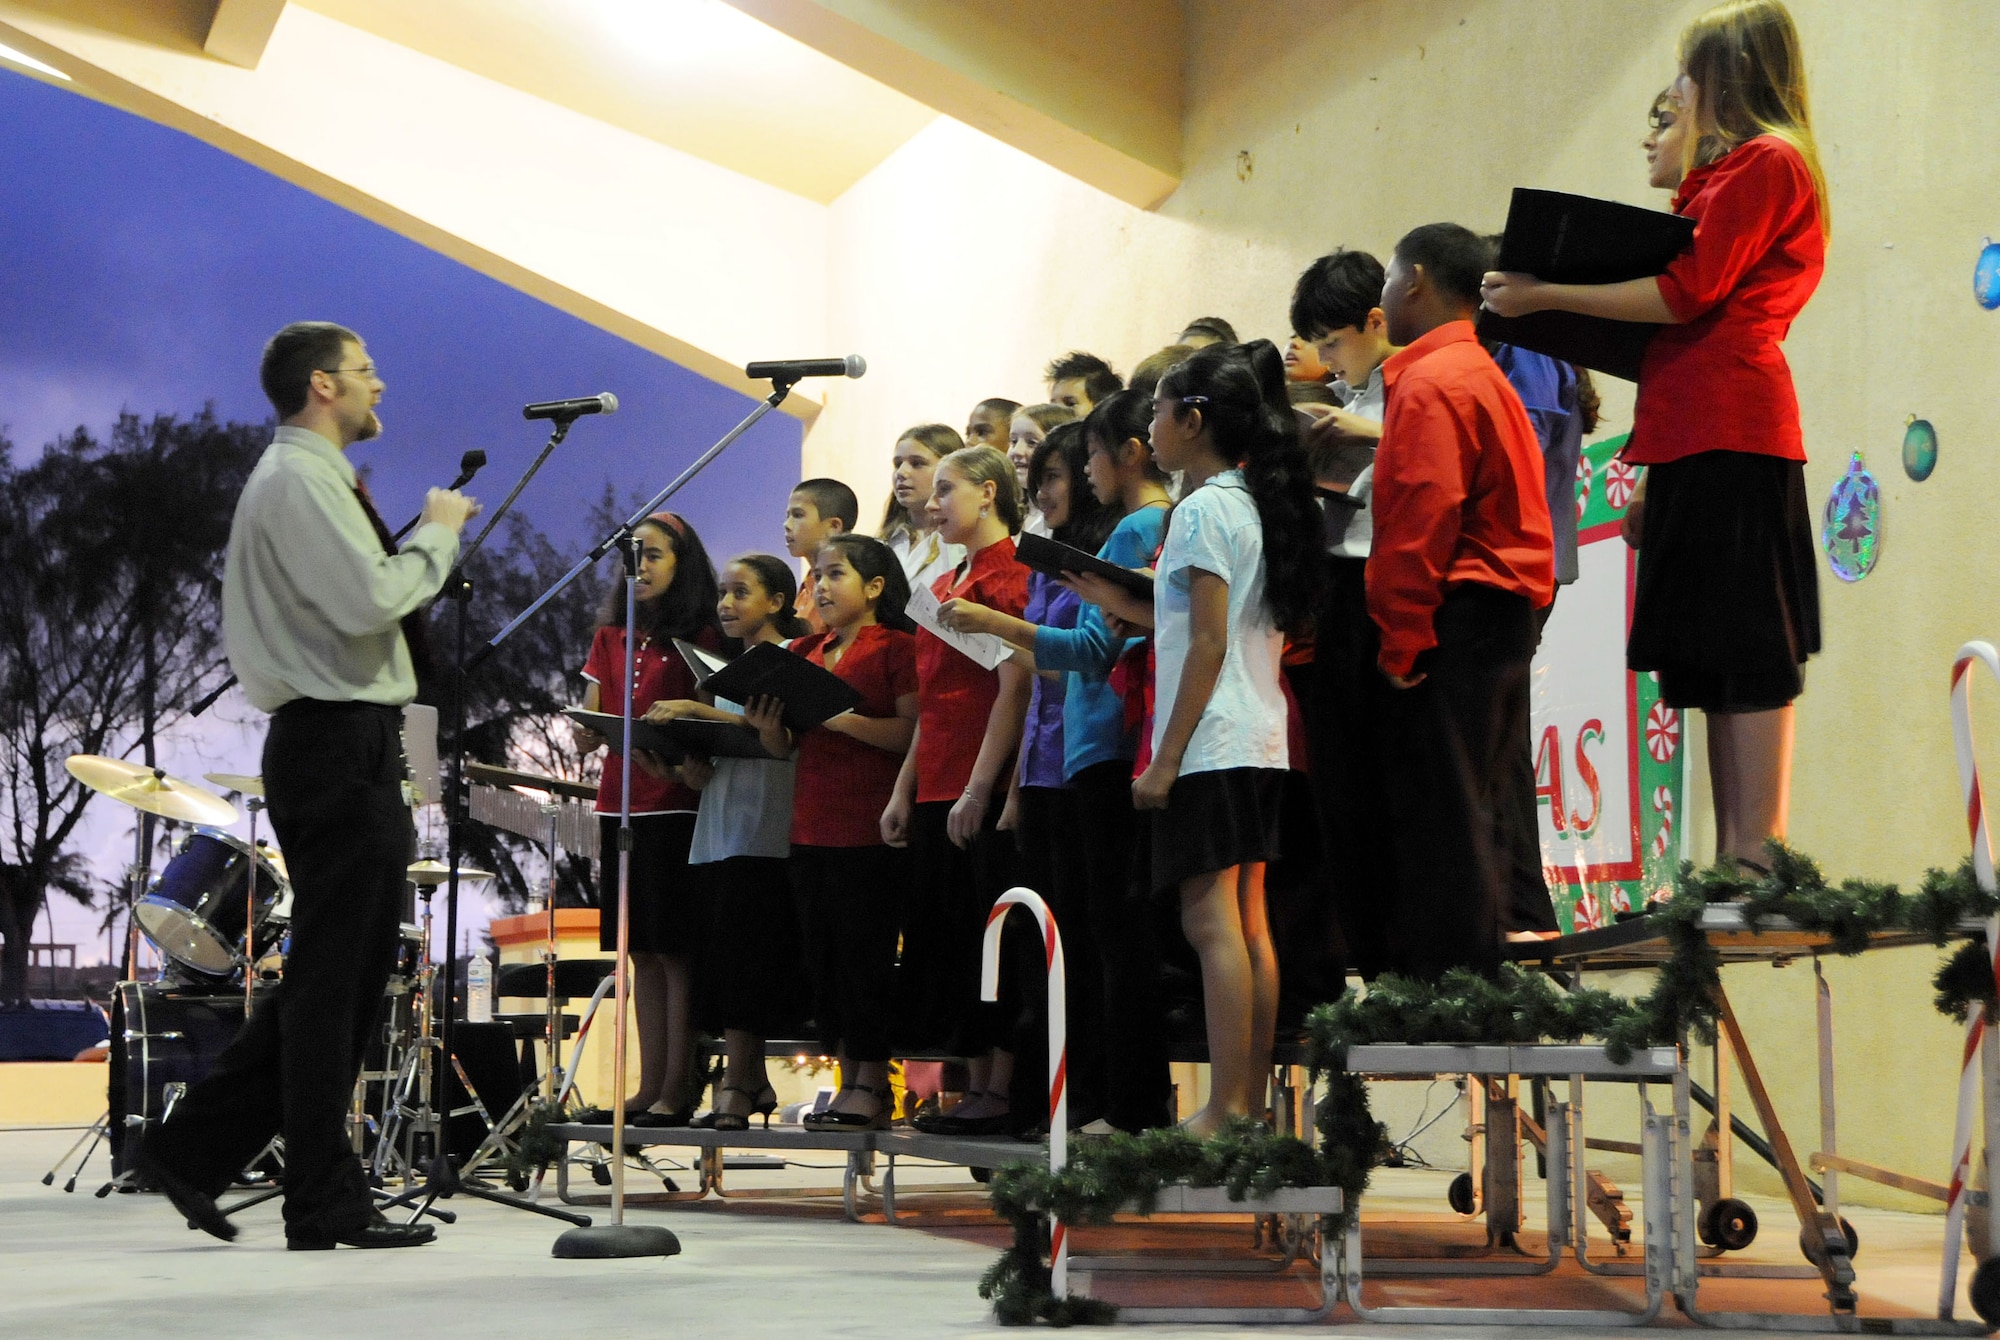 ANDERSEN AIR FORCE BASE, Guam - Andersen Middle School students sing carols at this years Christmas Tree Lighting celebration here Dec. 4. The Middle School was one of many performers that night. (U.S. Air Force photo by Airman 1st Class Courtney Witt)